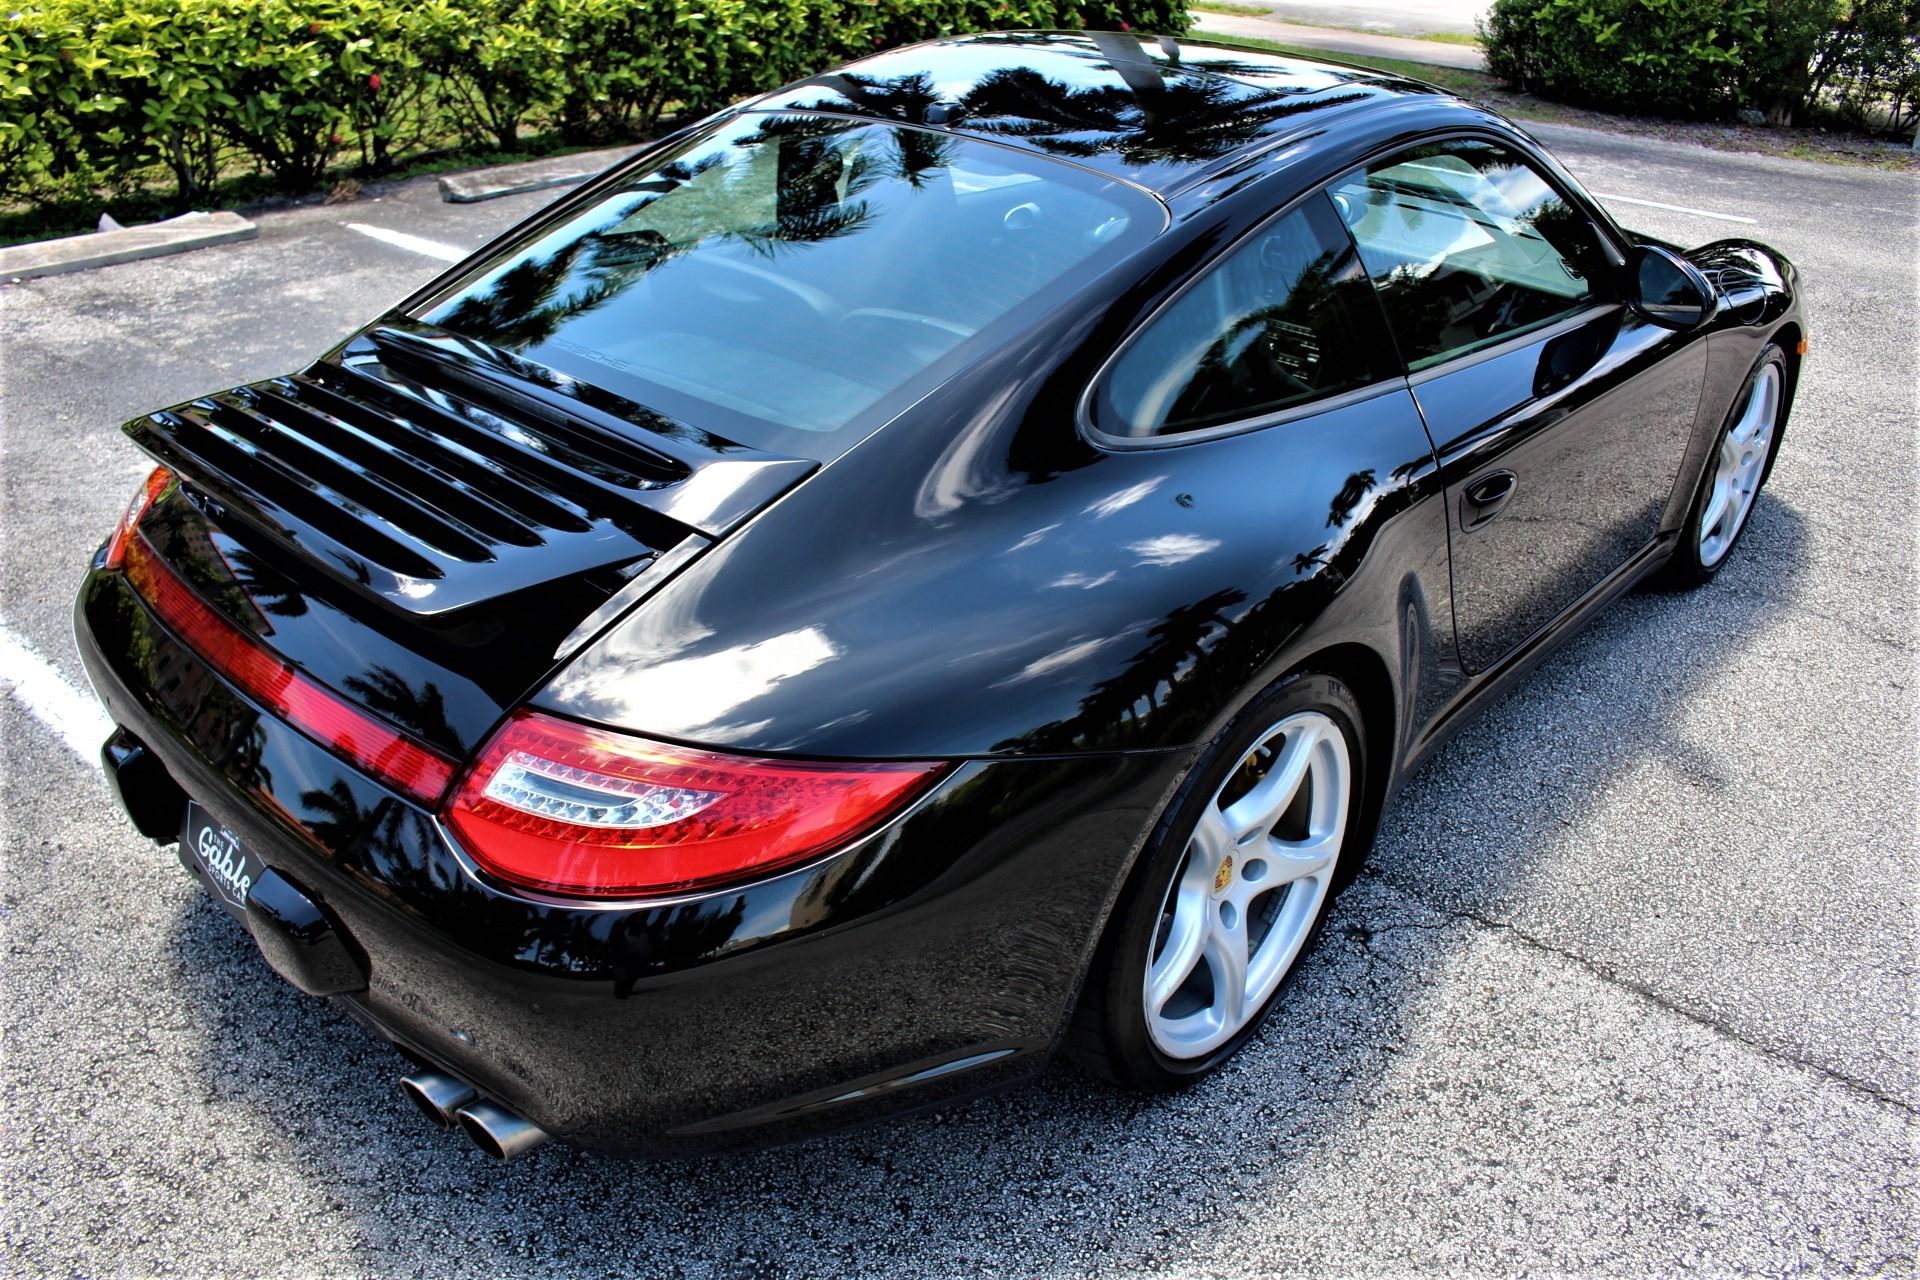 Used 2009 Porsche 911 Carrera 4S For Sale ($61,850) | The Gables Sports  Cars Stock #722839